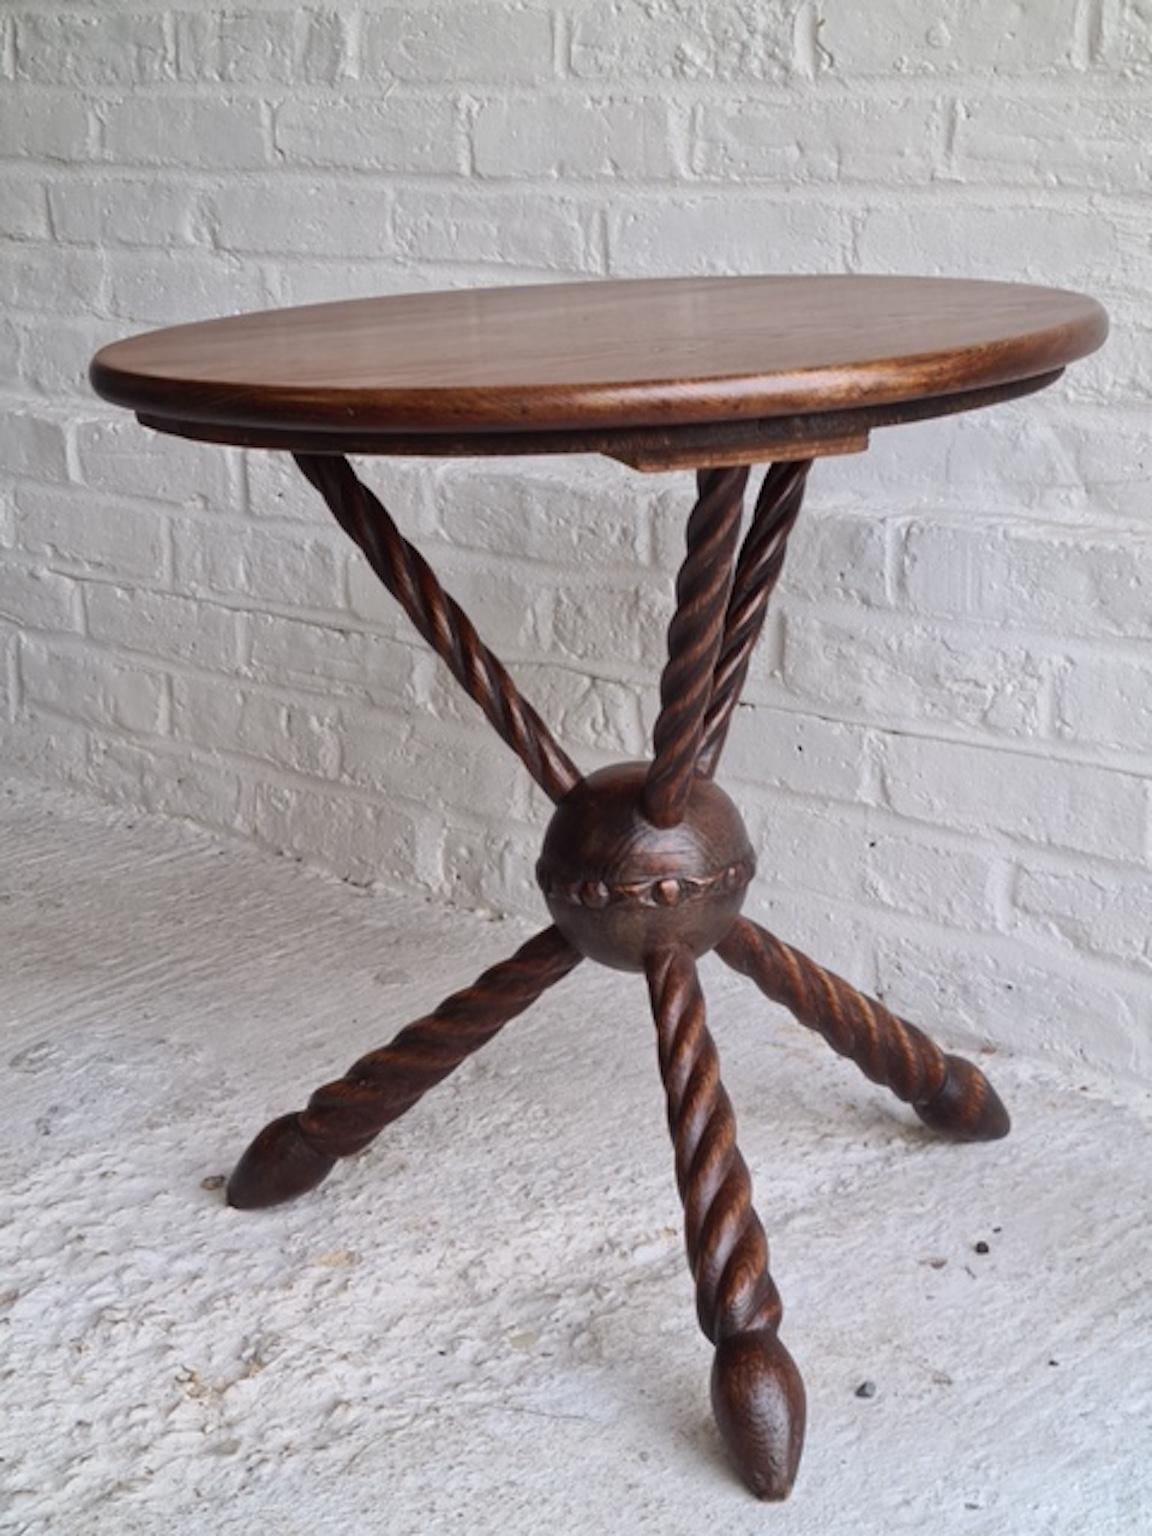 Antique gypsy table, occasional / side table. Tripod legs, circa 1860-1870 

A beautiful mahogany tripod base with twisted fluted legs, with central sphere, 
the round mahogany top would have once been covered in fabric.

In excellent